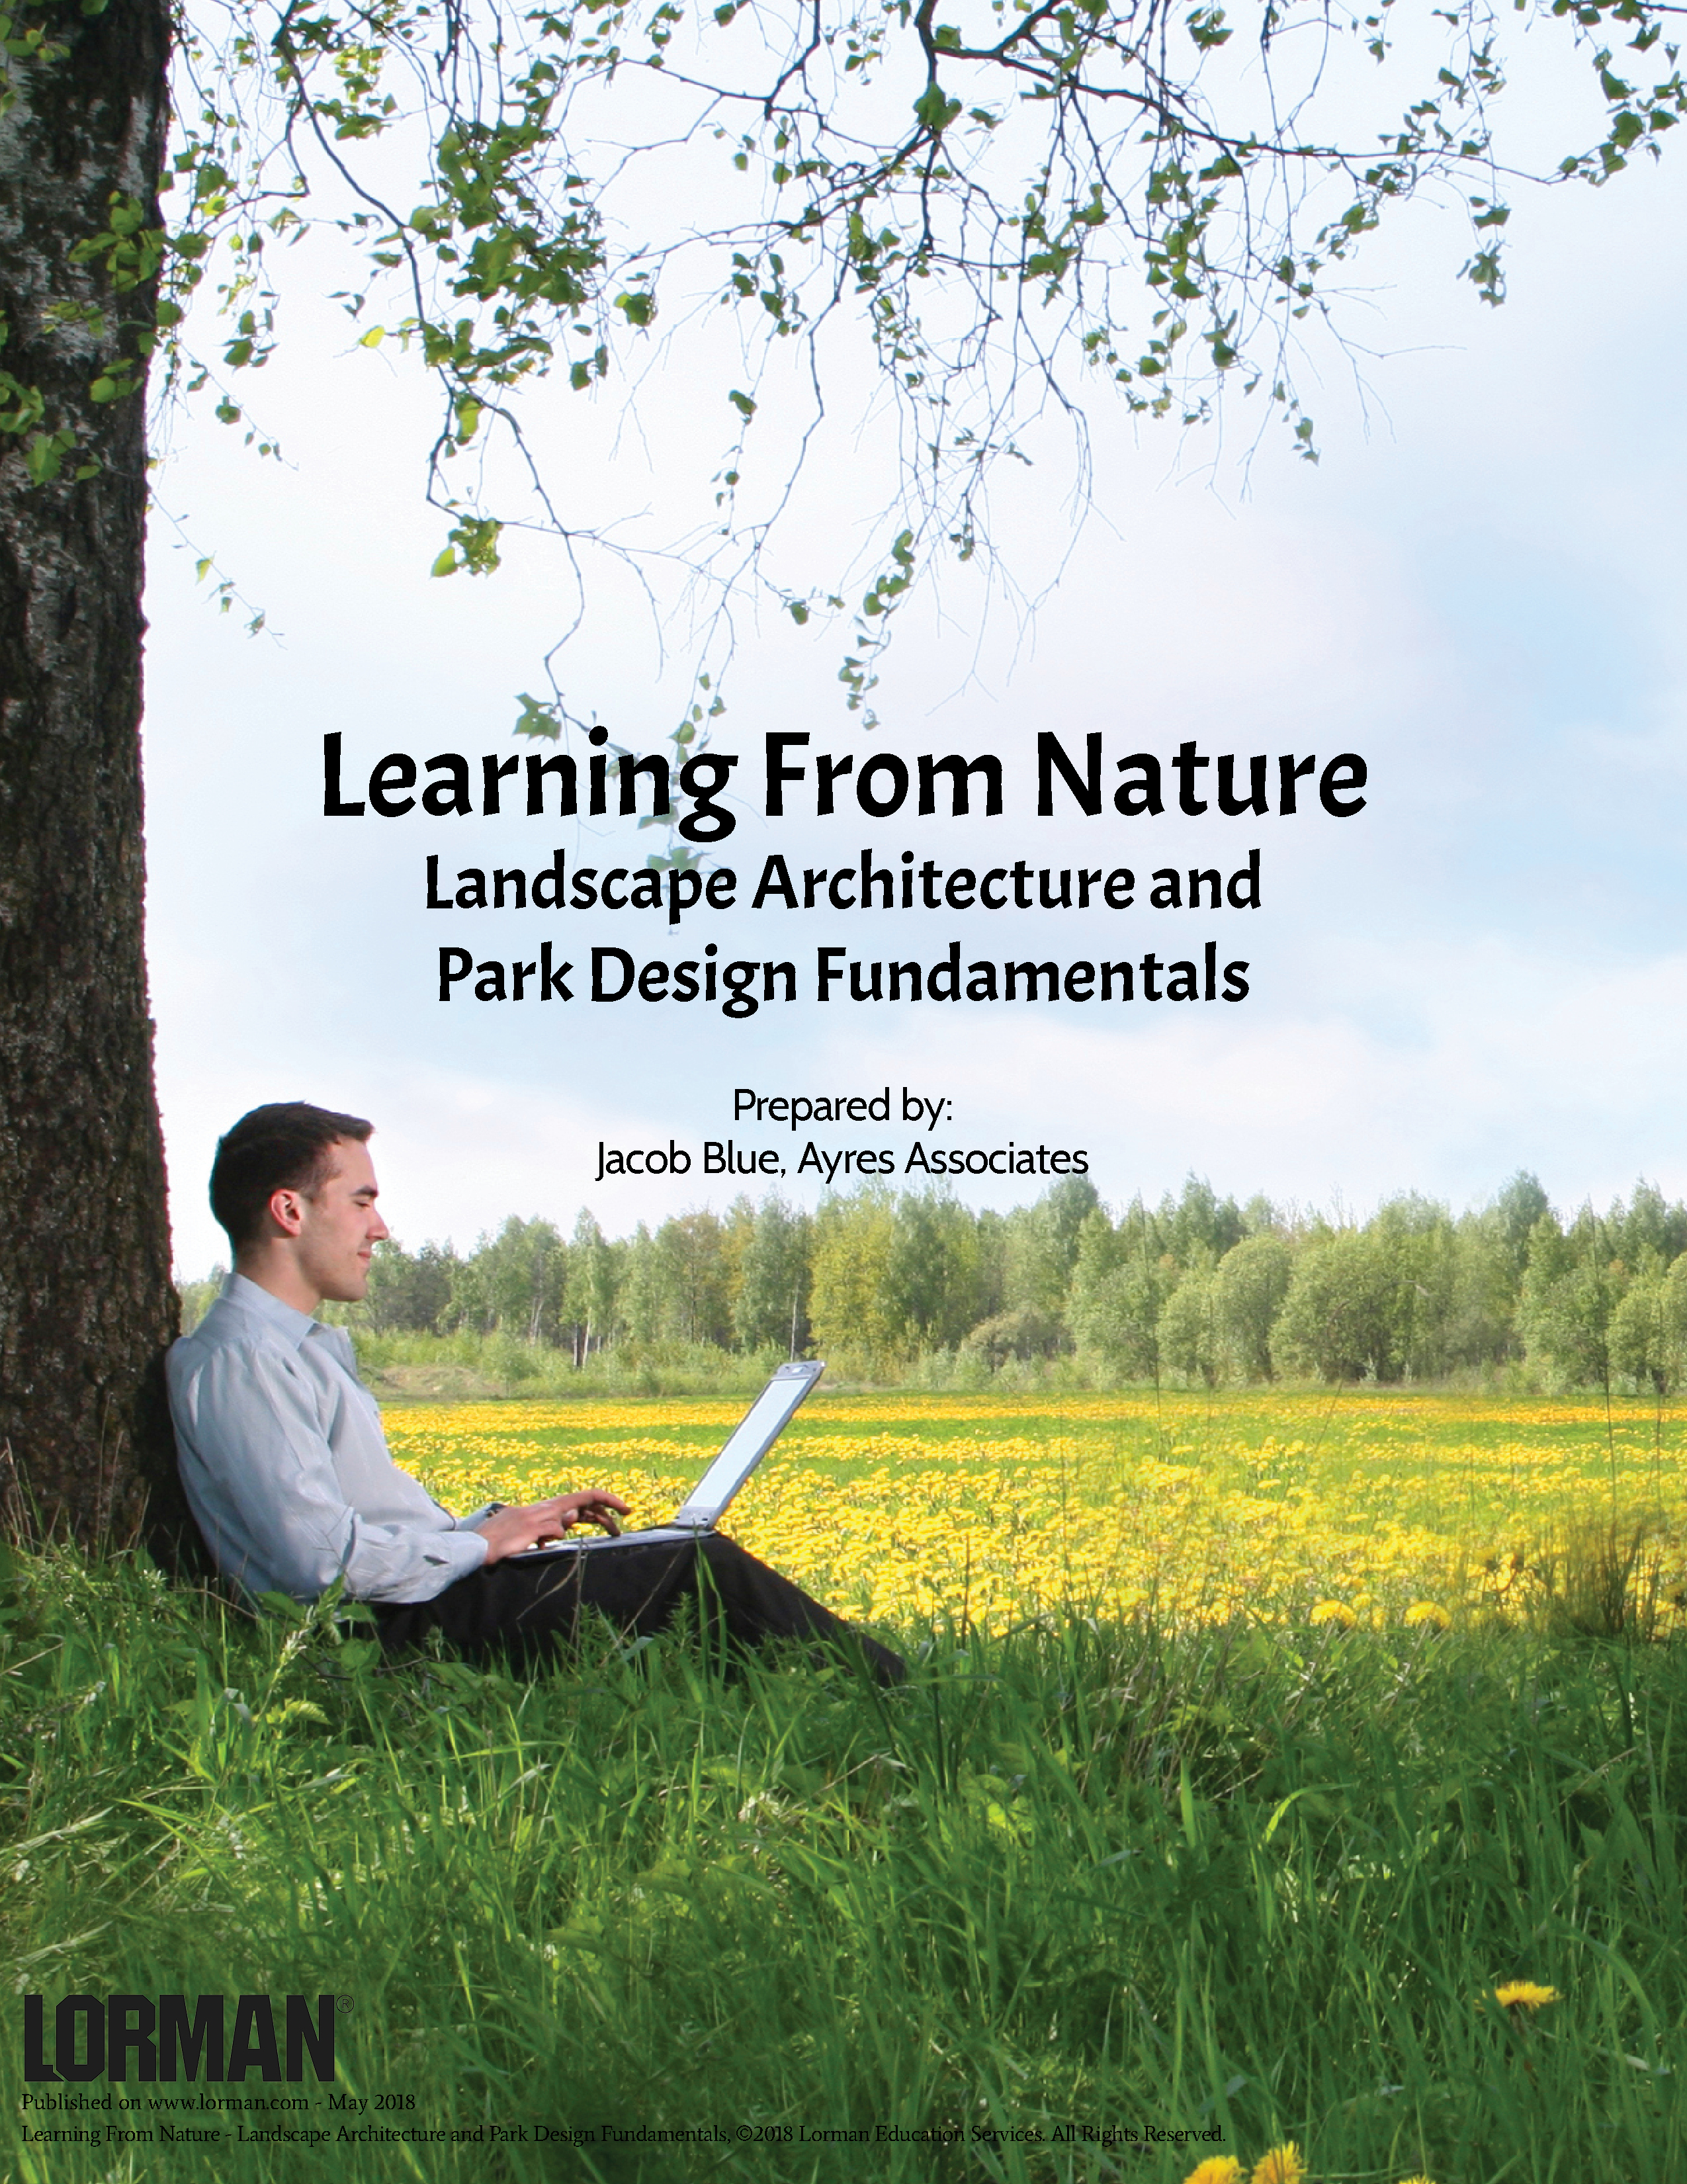 Learning From Nature - Landscape Architecture and Park Design Fundamentals